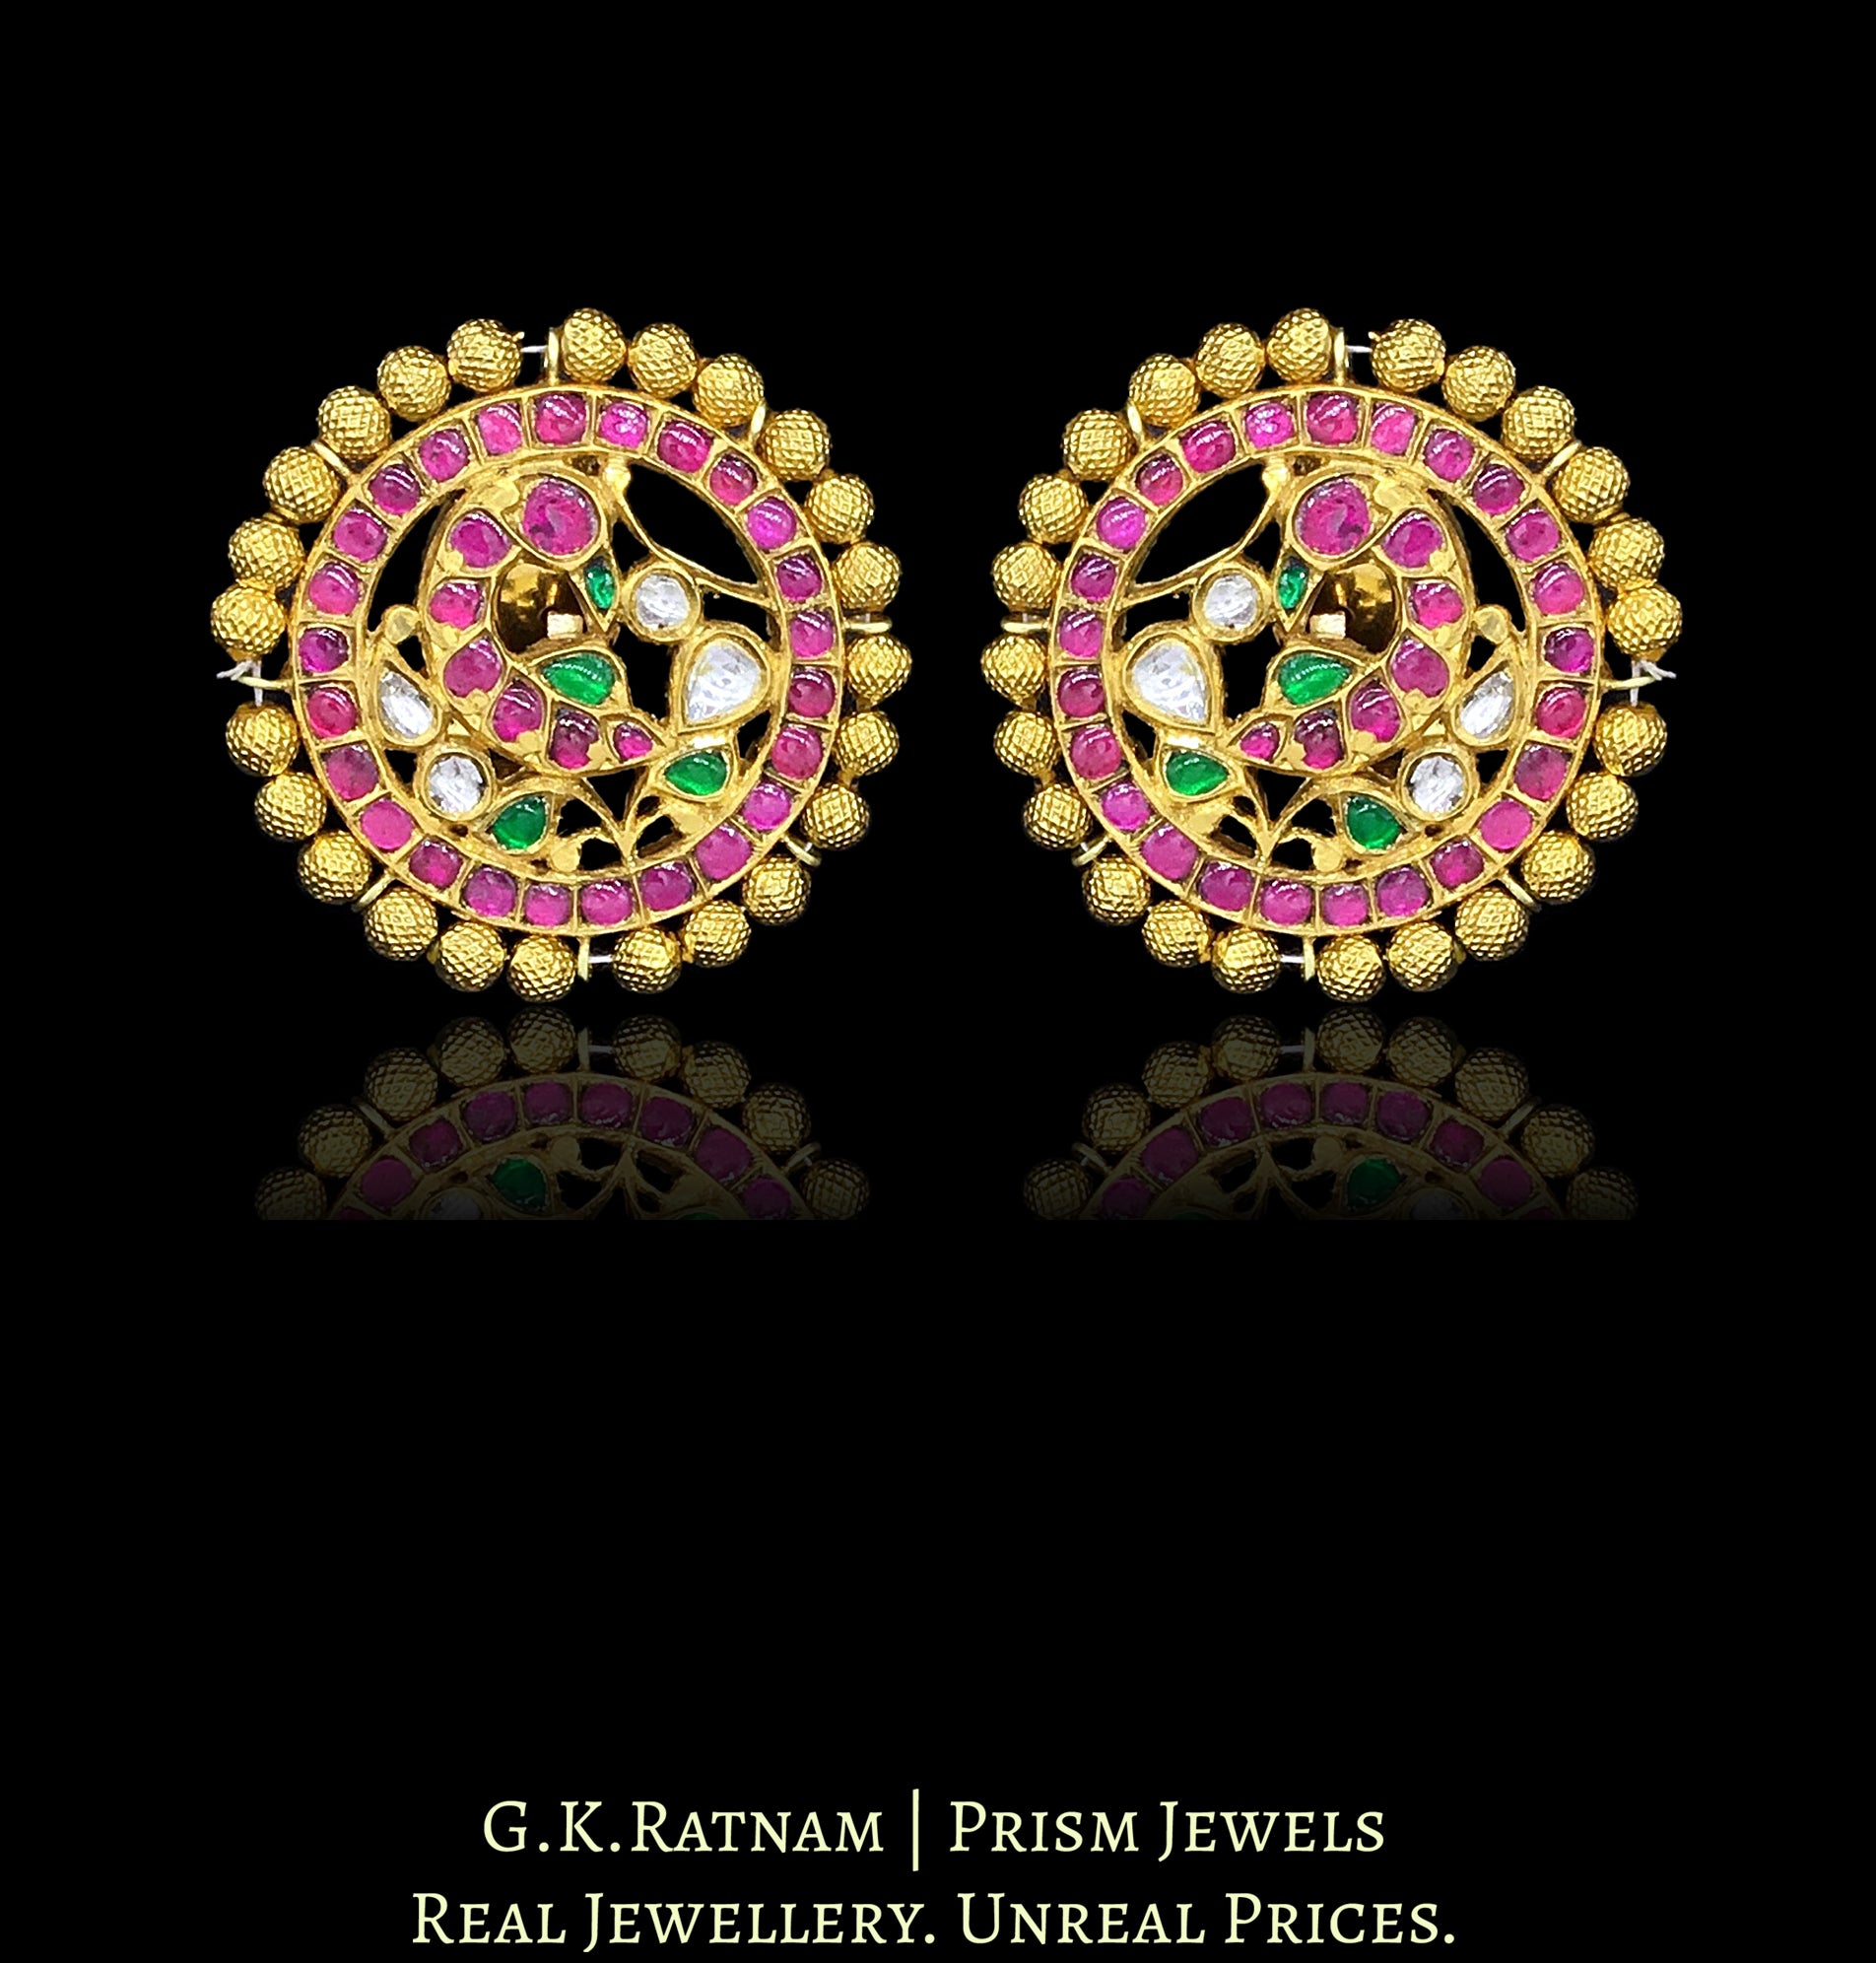 18k Gold and Diamond Polki Karanphool Earring Pair with Rubies, Emeralds and a rim of gold beads